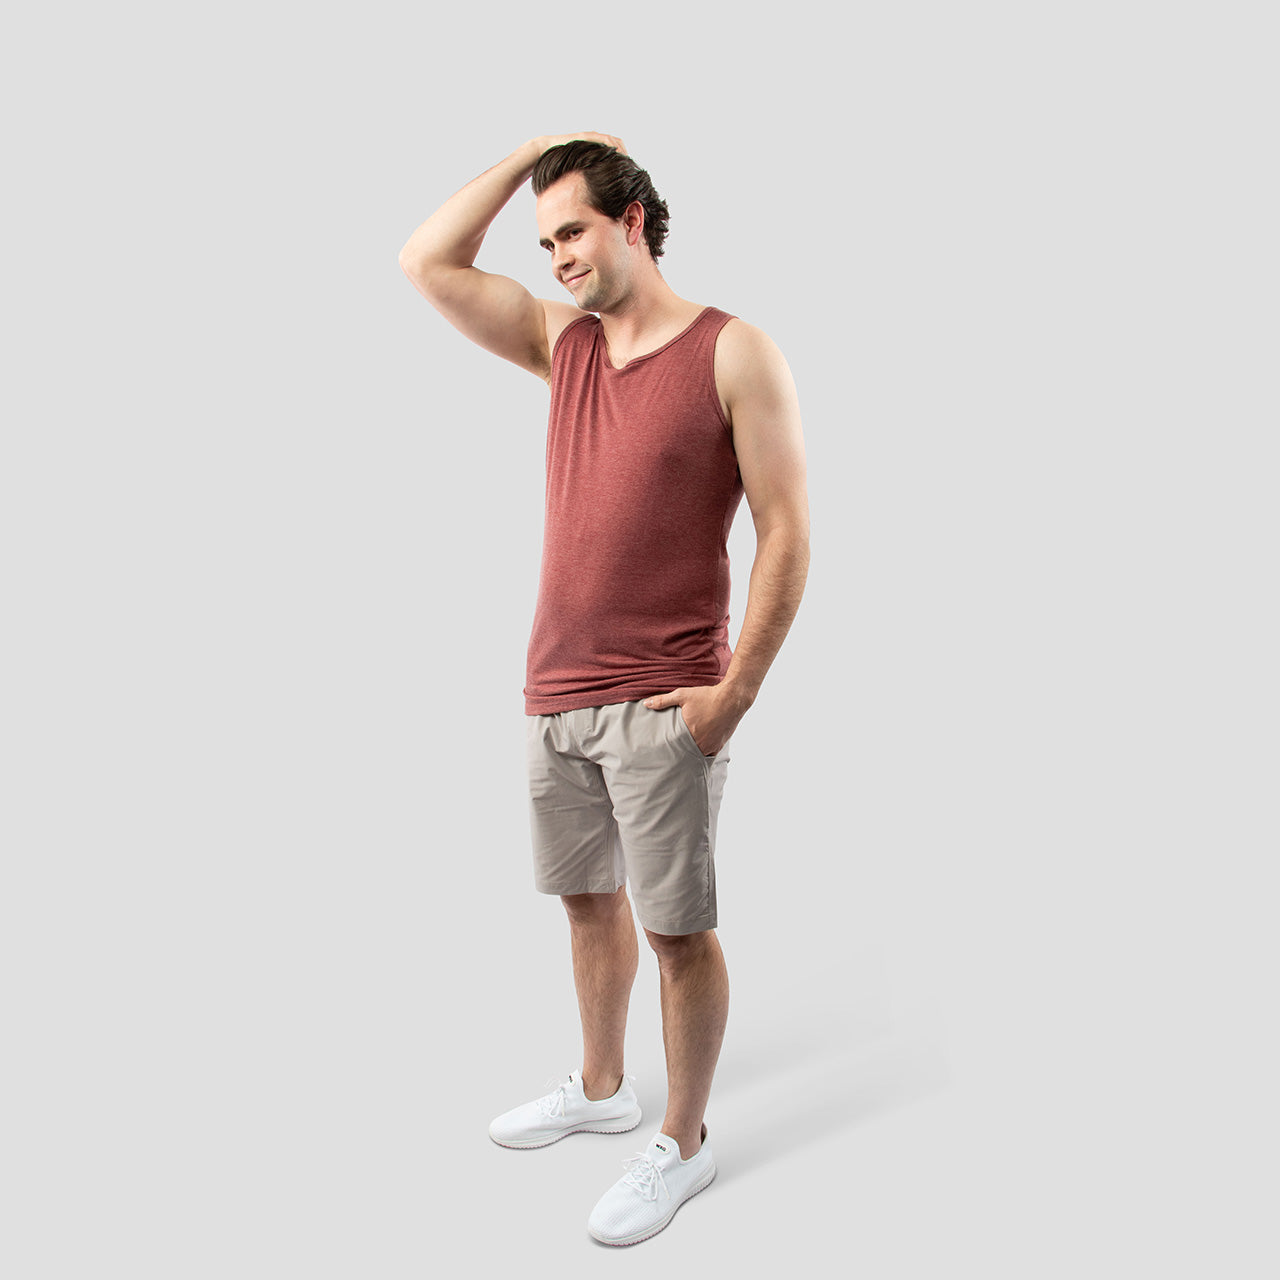 Red Tank Top For Tall Slim Men